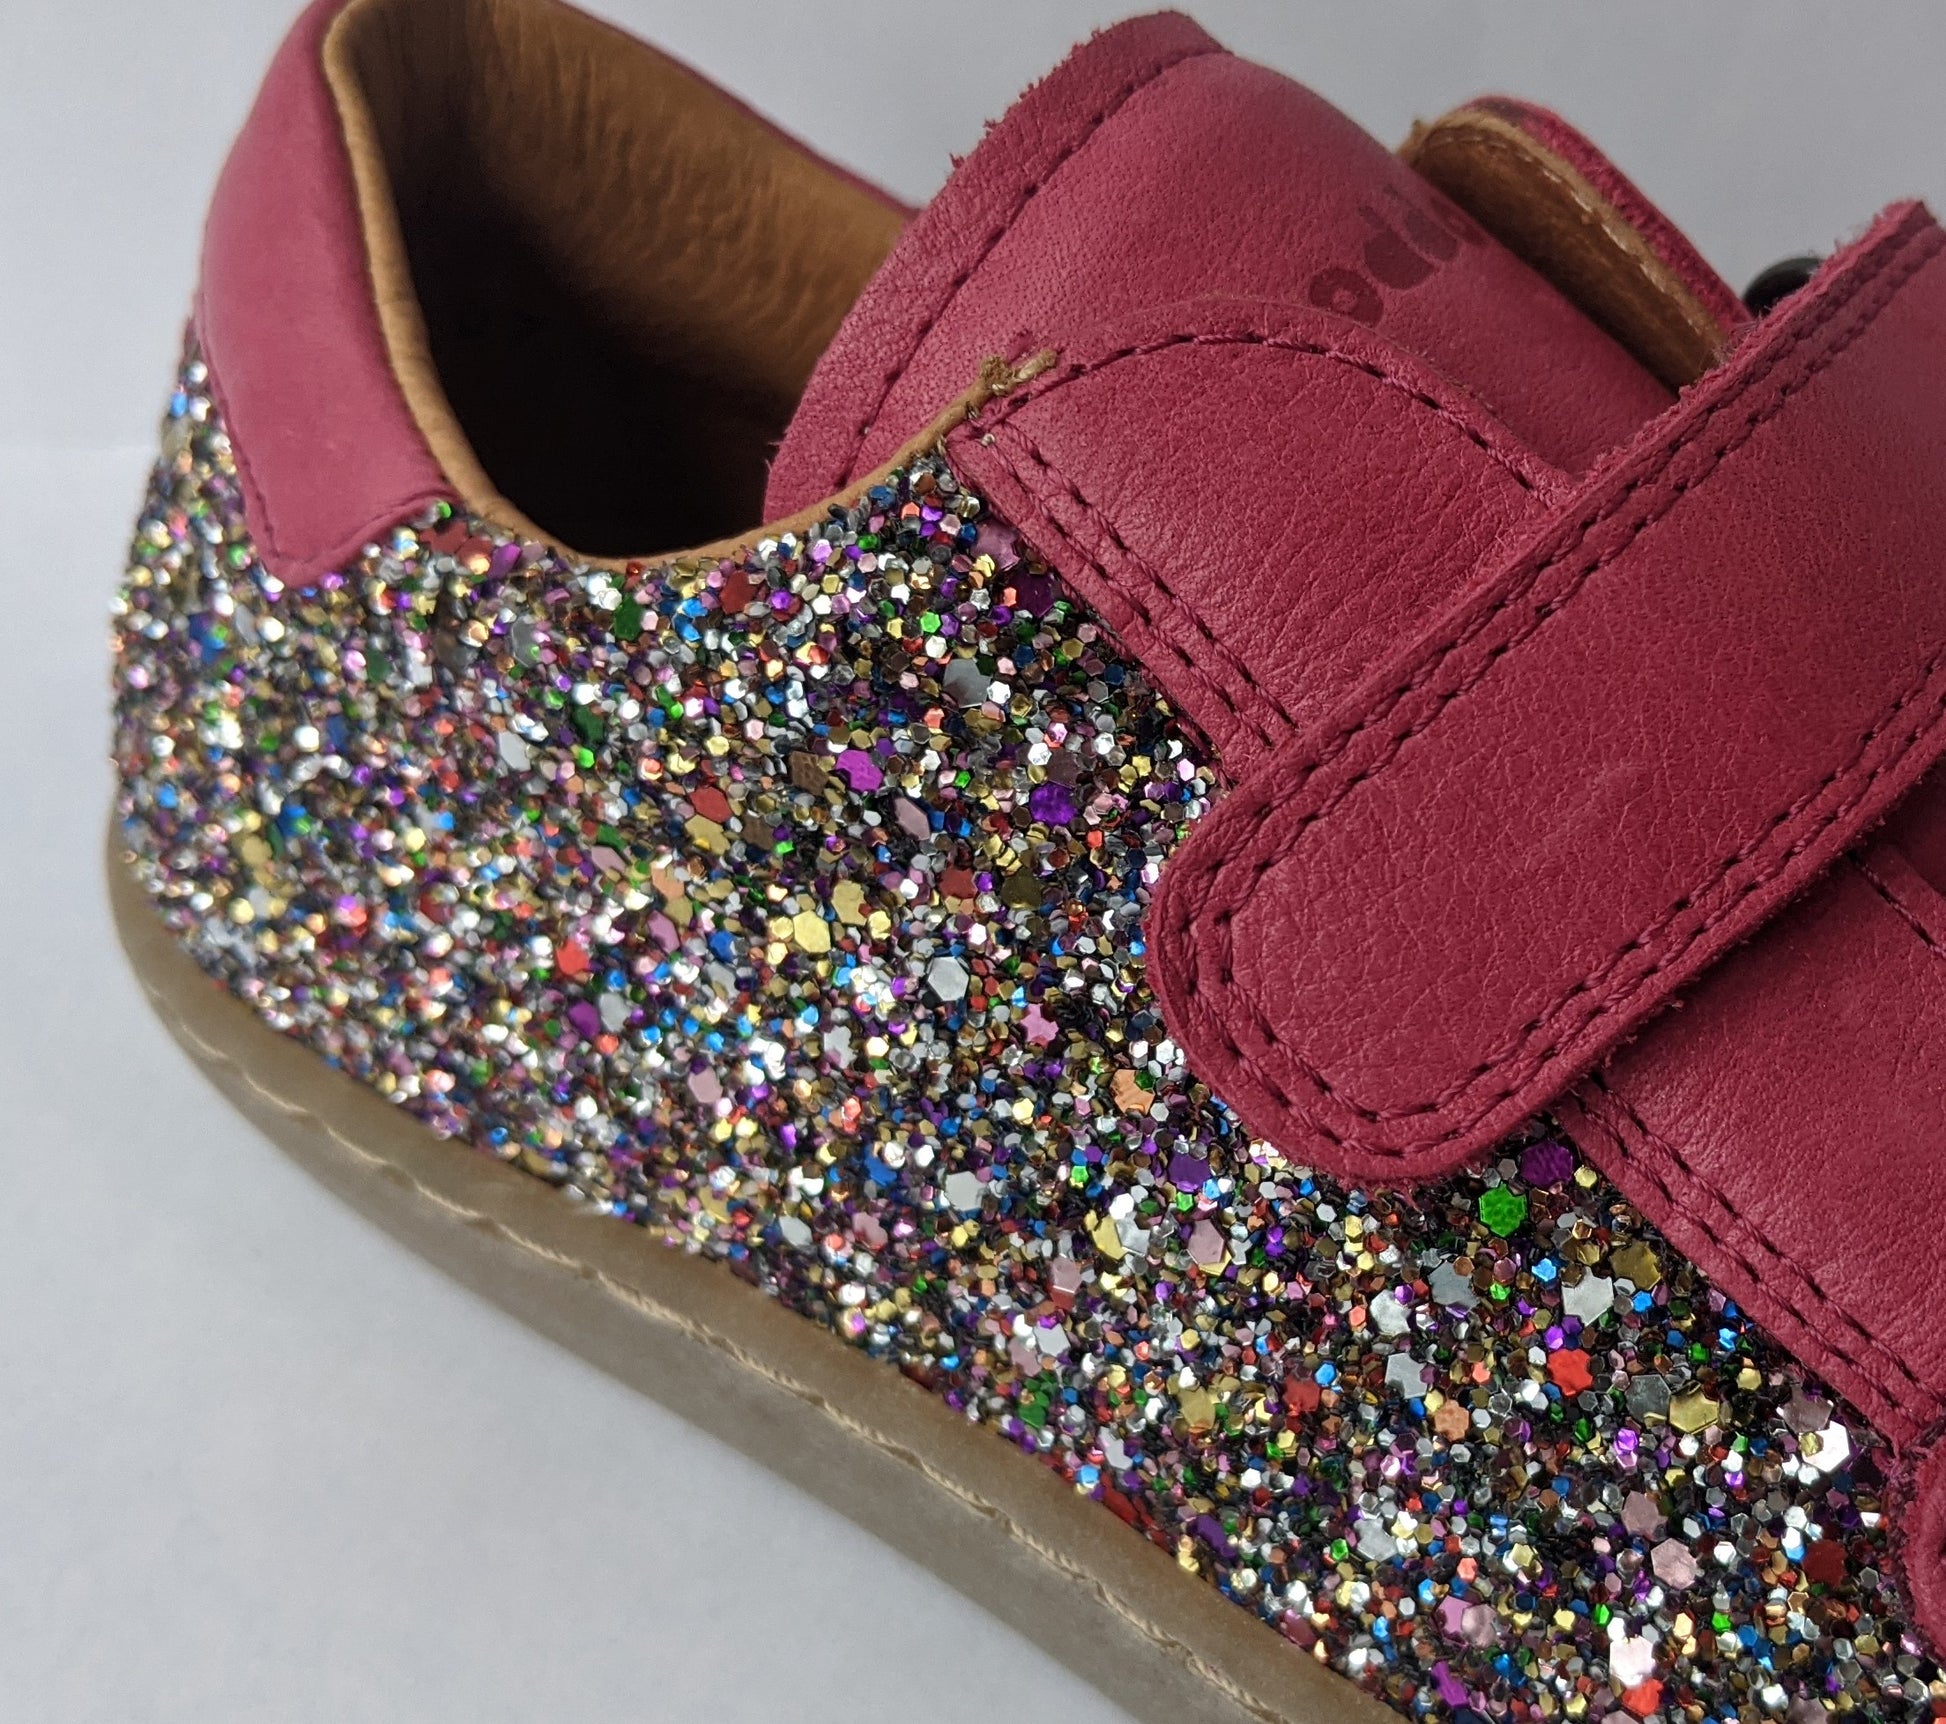 A girls casual shoe by Froddo, style G3130094-6 in Fuchsia leather and glitter with velcro fastening. Close up.